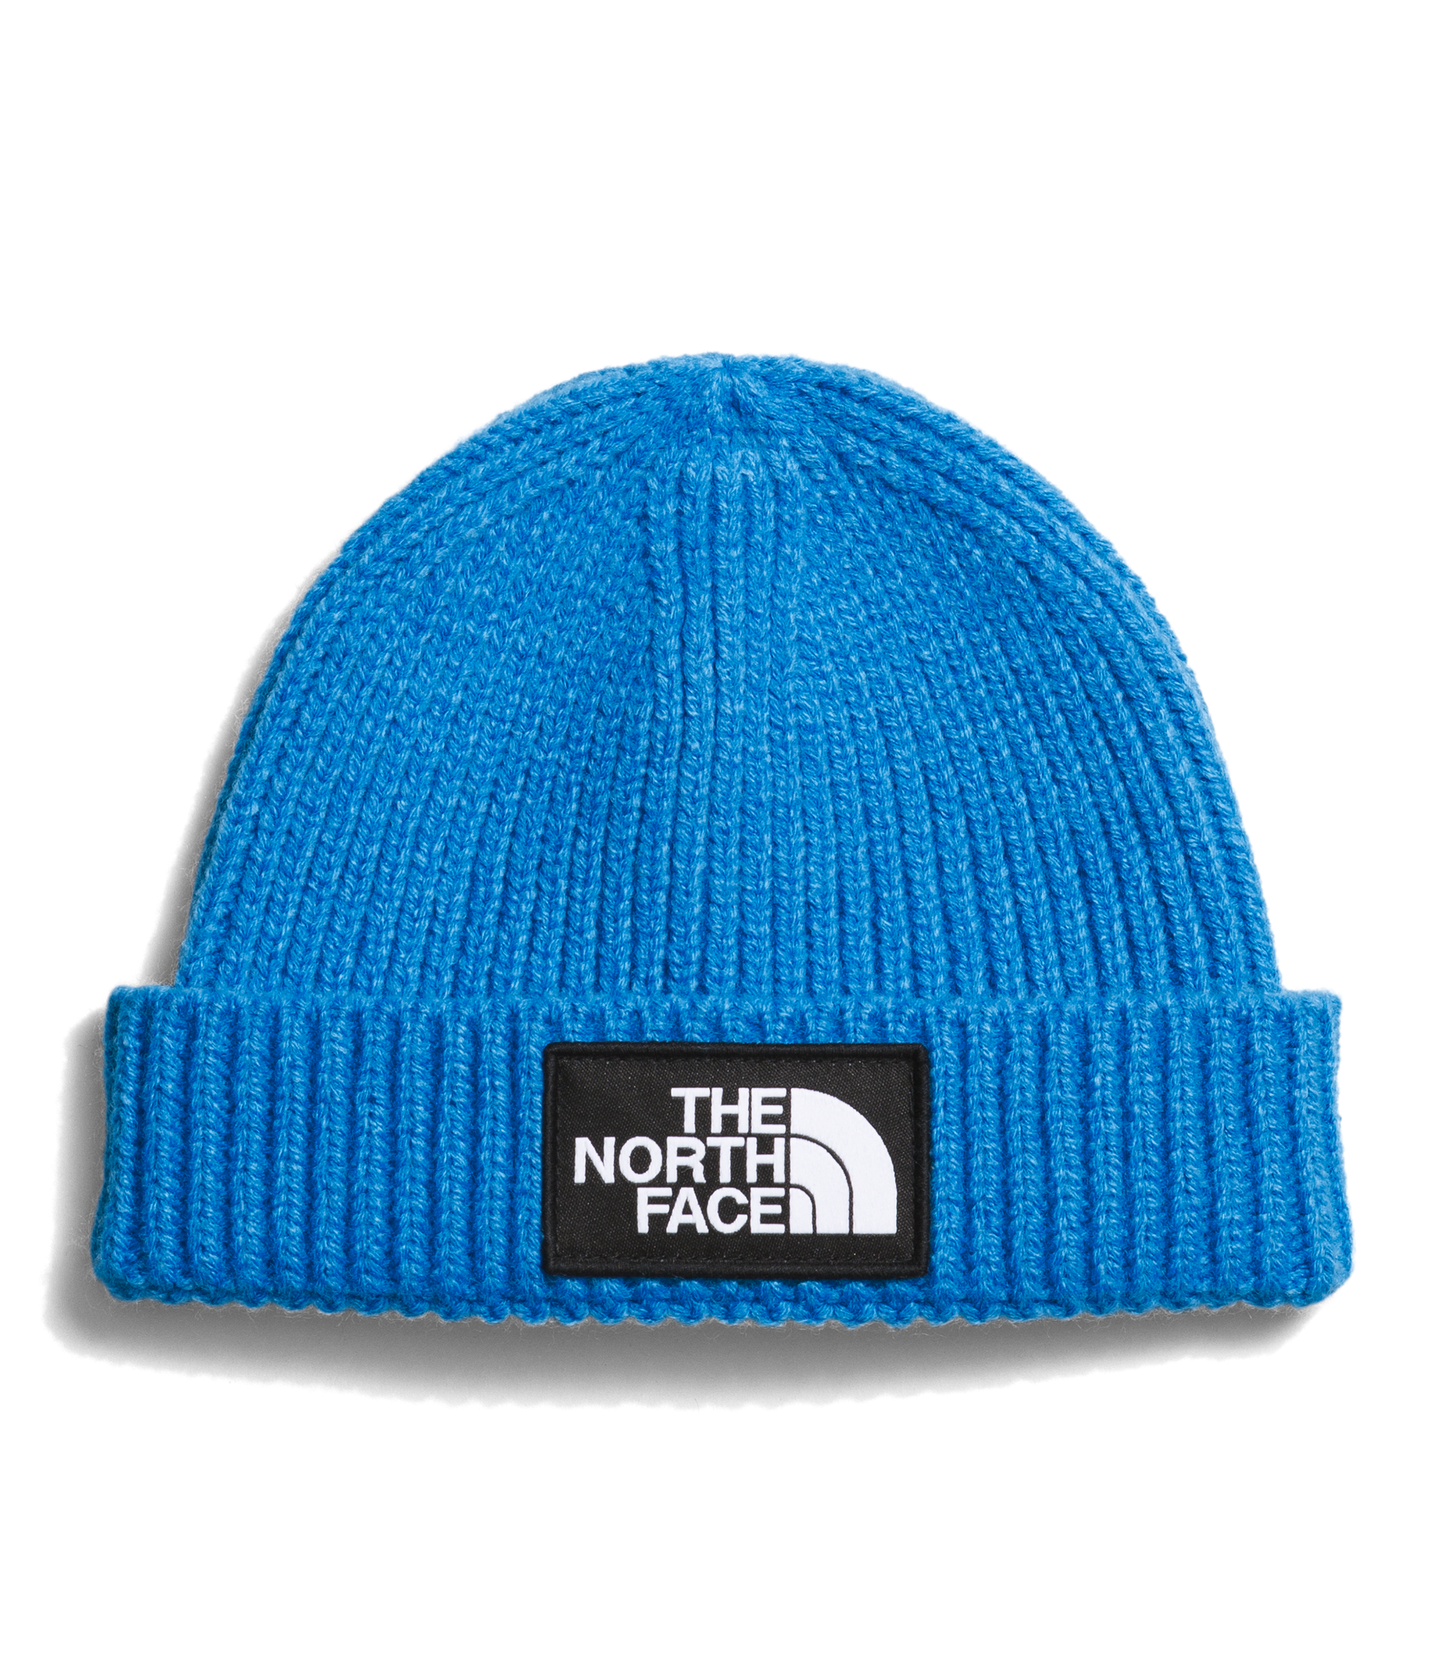 The North Face Baby Box Logo Beanie - Infants'